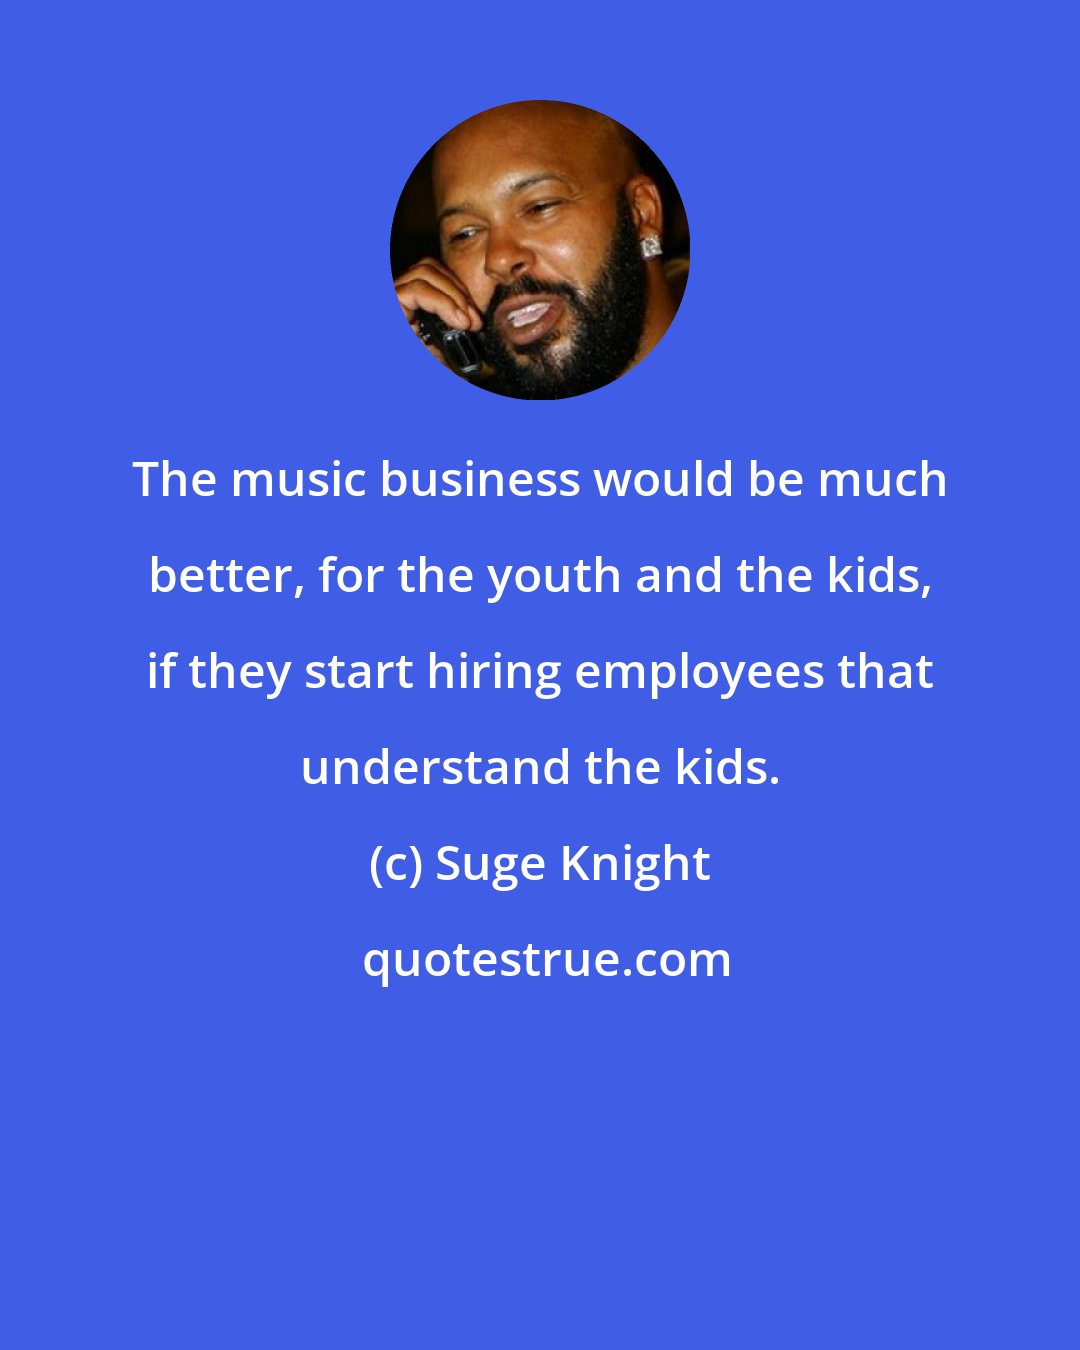 Suge Knight: The music business would be much better, for the youth and the kids, if they start hiring employees that understand the kids.